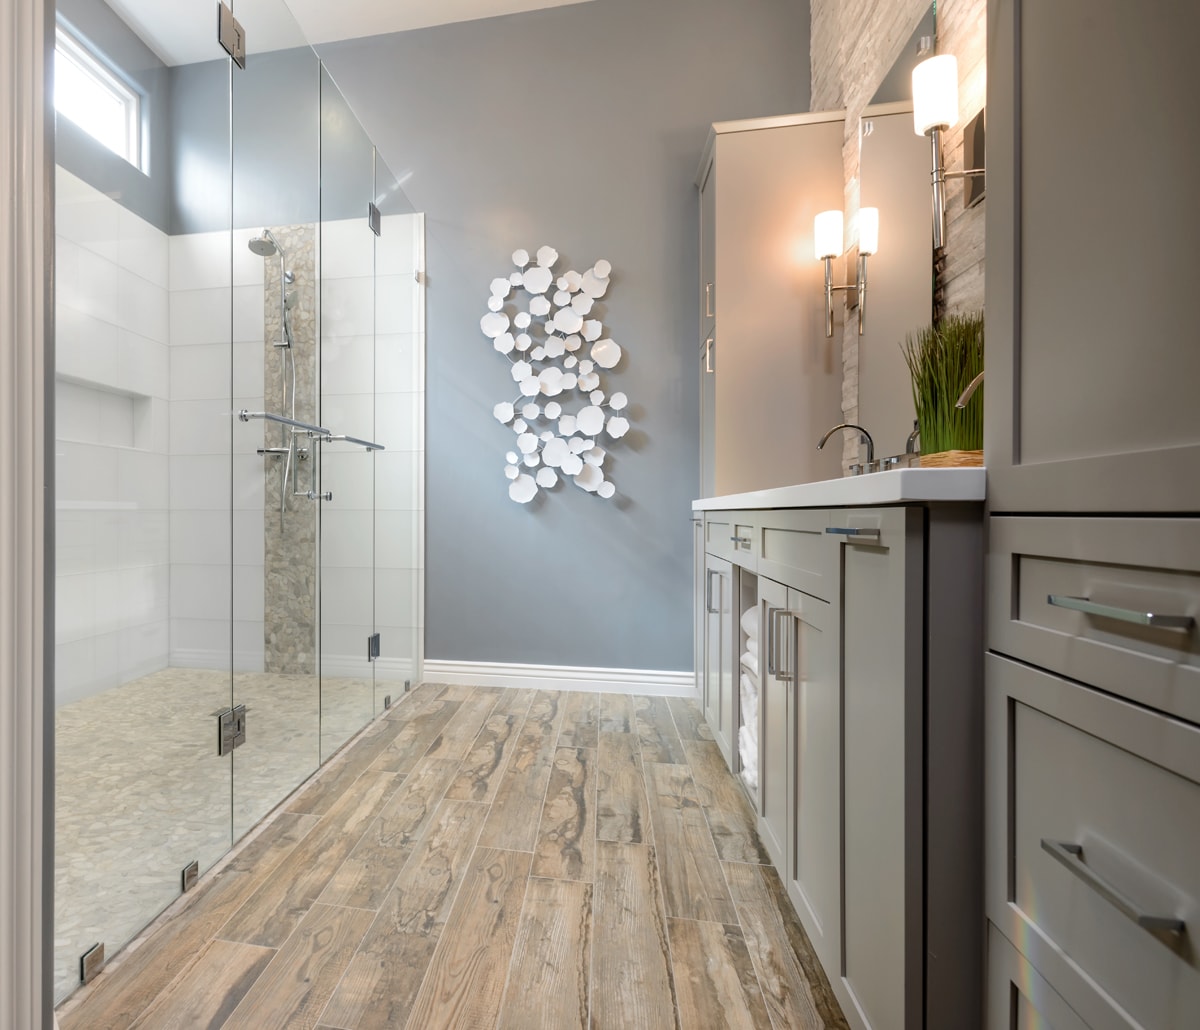 A large glass shower across from a light grey bathroom vanity.